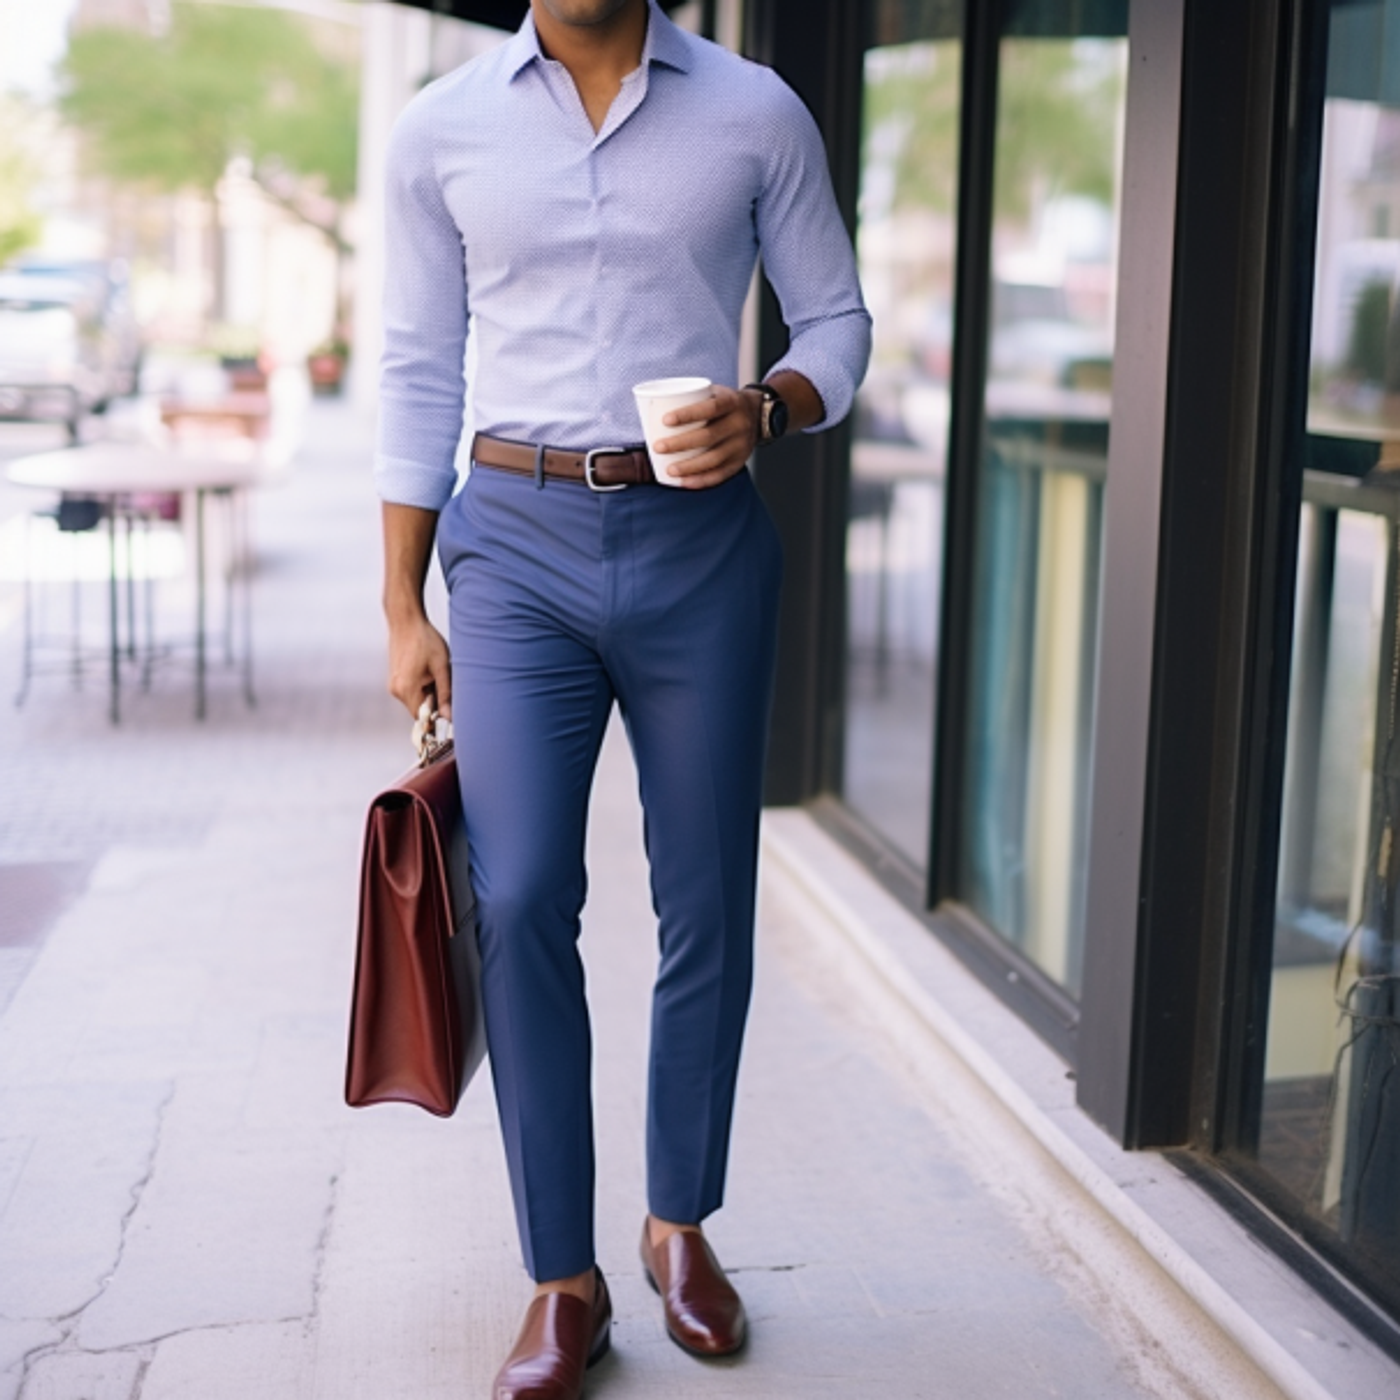 Light Blue Dress Pants with Gold Watch Outfits For Men (3 ideas & outfits)